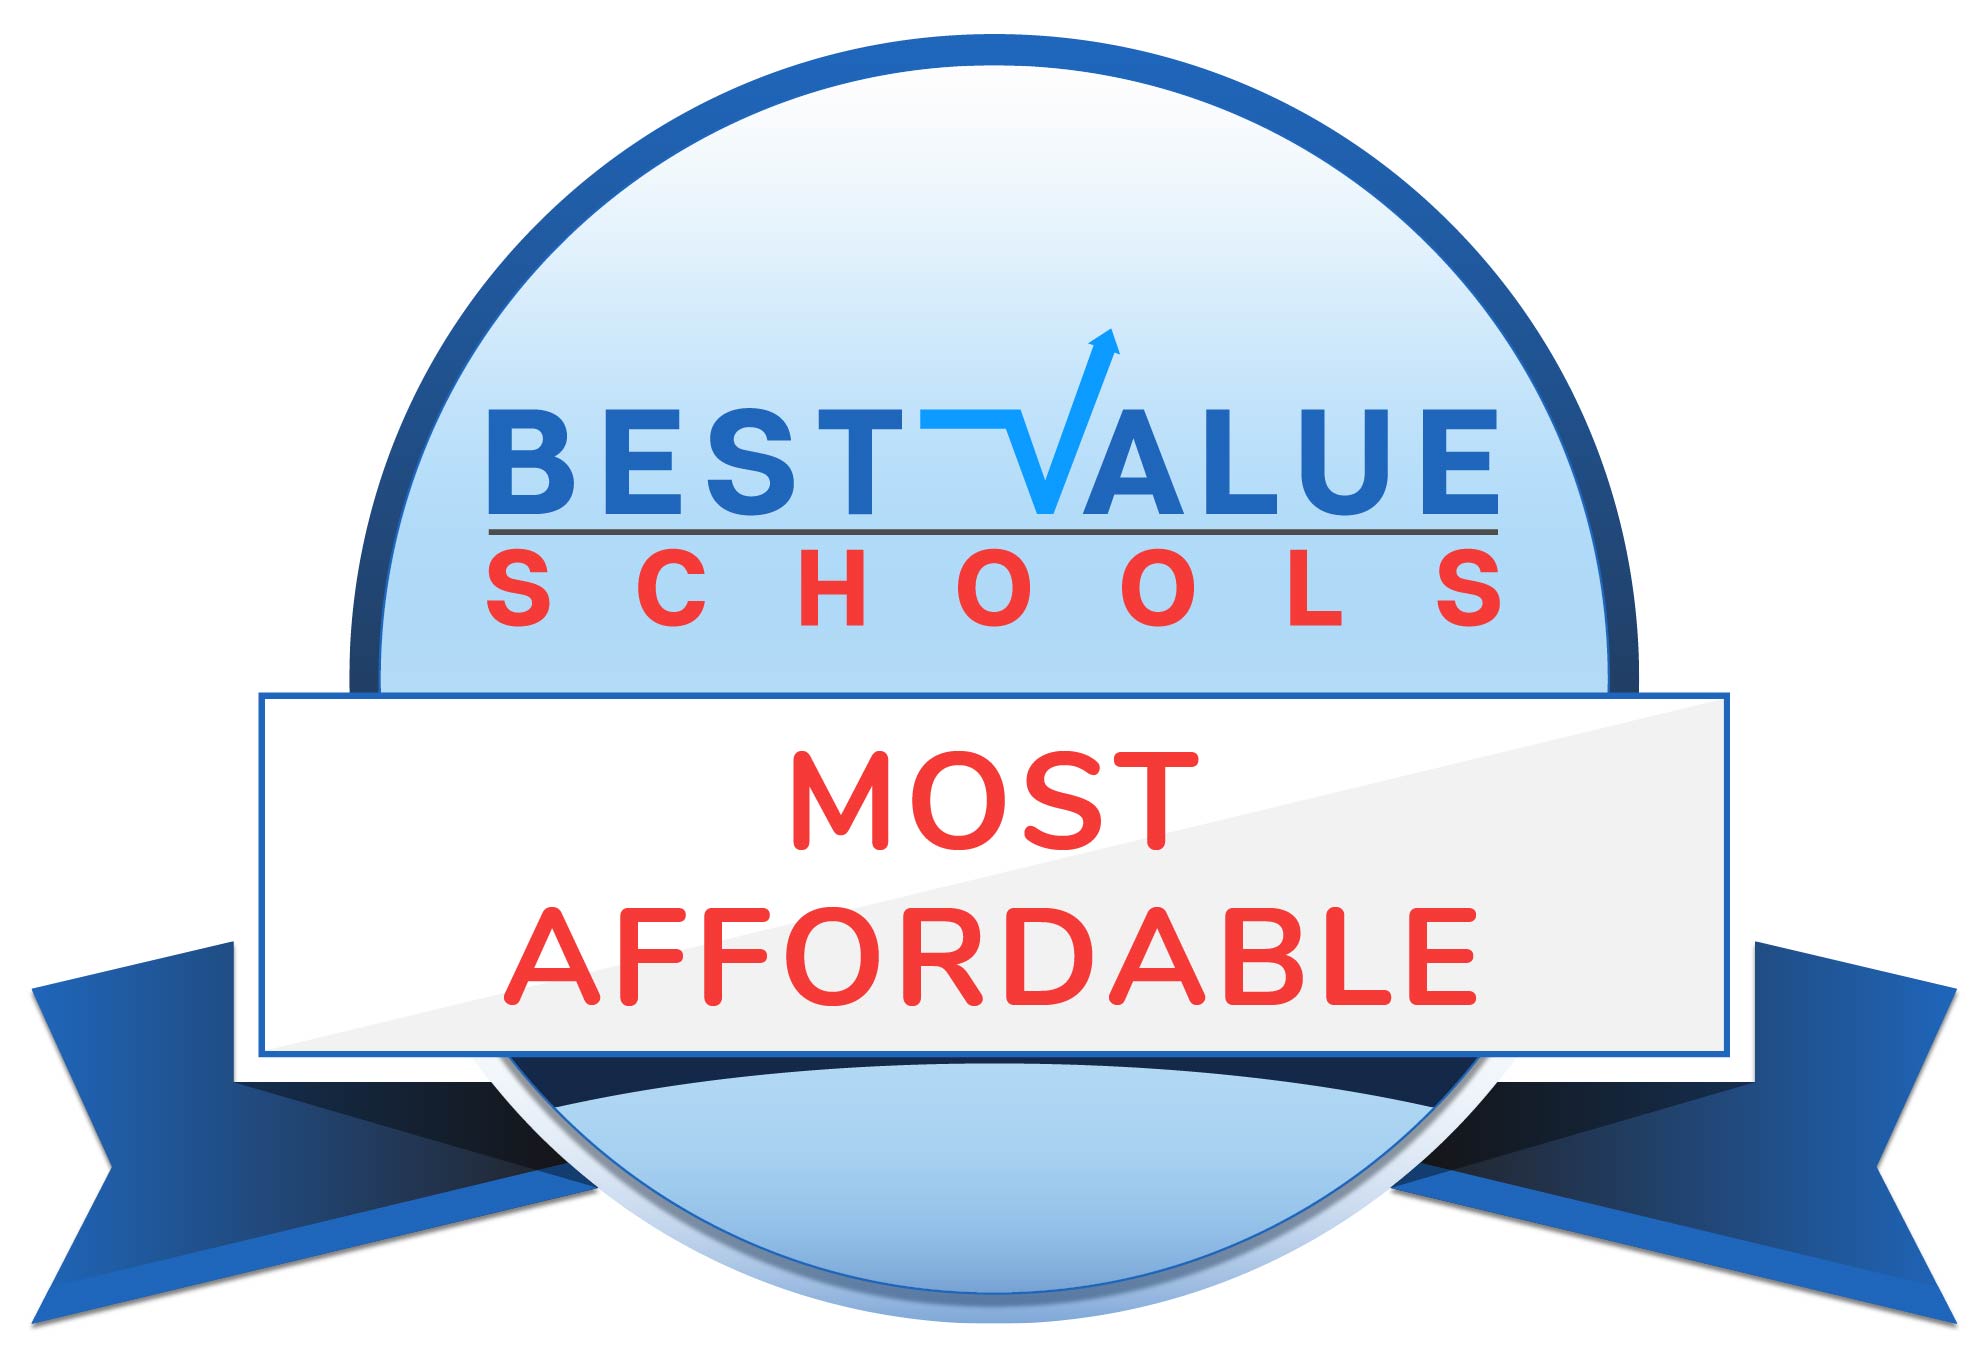 Best Value Schools - Most Affordable